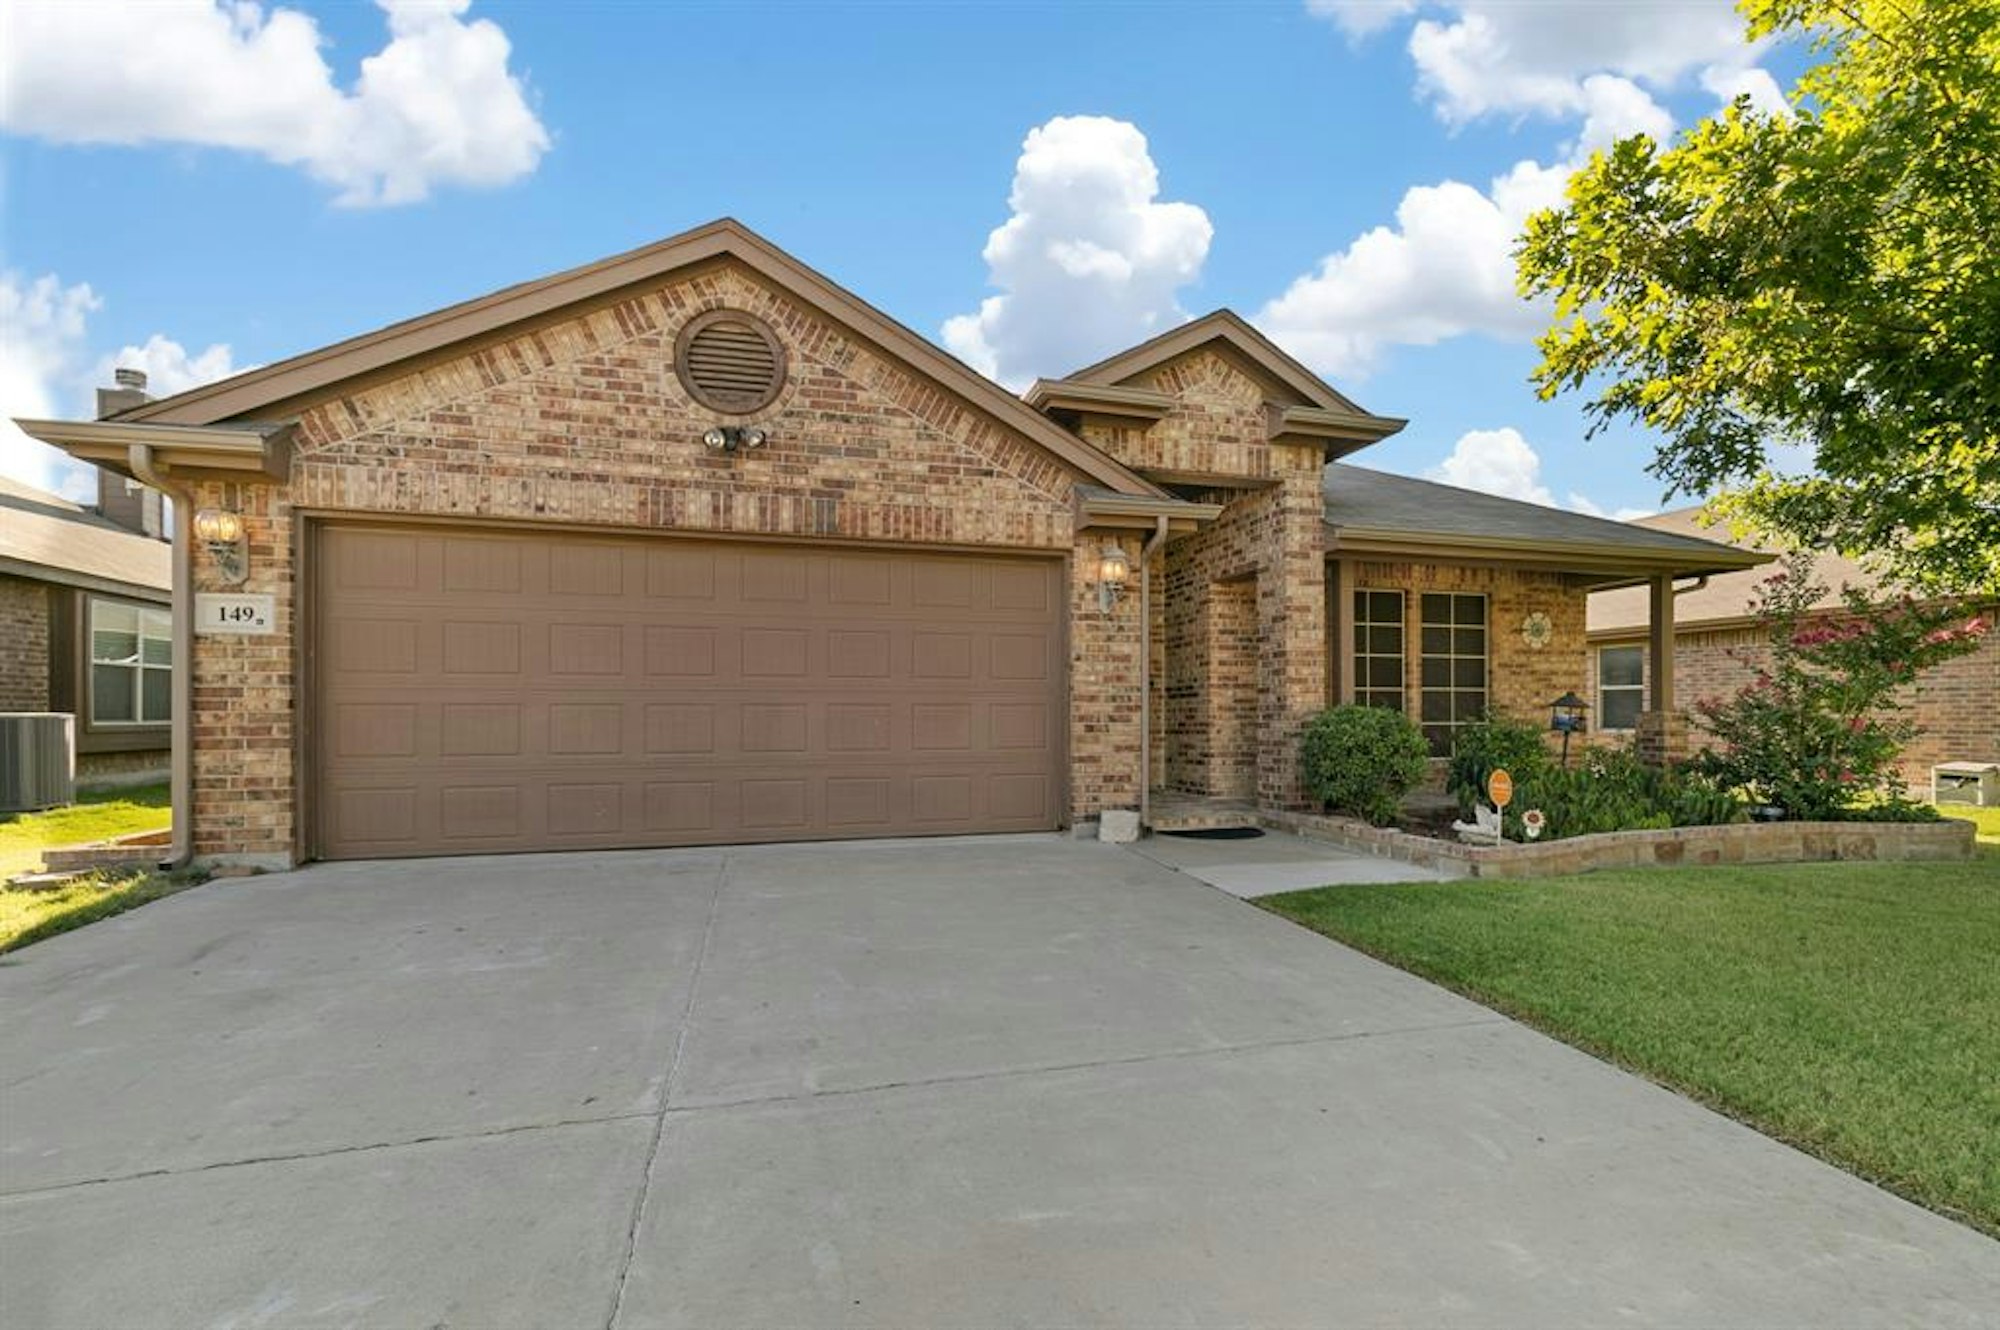 Photo 1 of 35 - 149 Spring Hollow Dr, Fort Worth, TX 76131